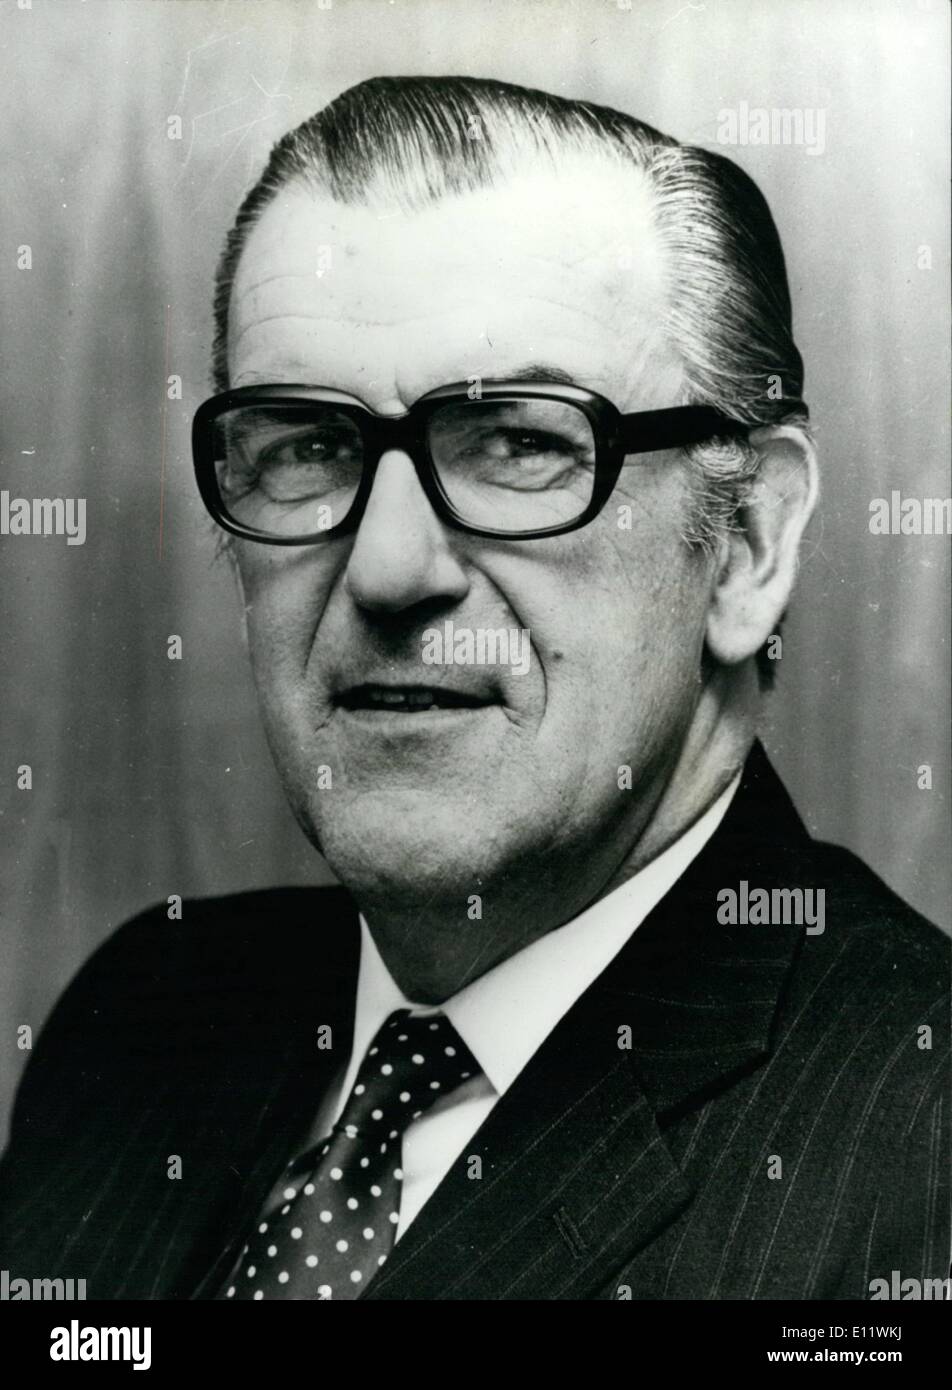 Sep. 09, 1980 - Mr. Sam Toy the new chairman and managing Director of Ford; The directors of Ford of Britain yesterday appointed Mr. Sam Toy, Chairman and Managing Director. He succeeds Sir Tarono Beckett, who leaves Ford at the end of the month to become Director General of the Stock Photo